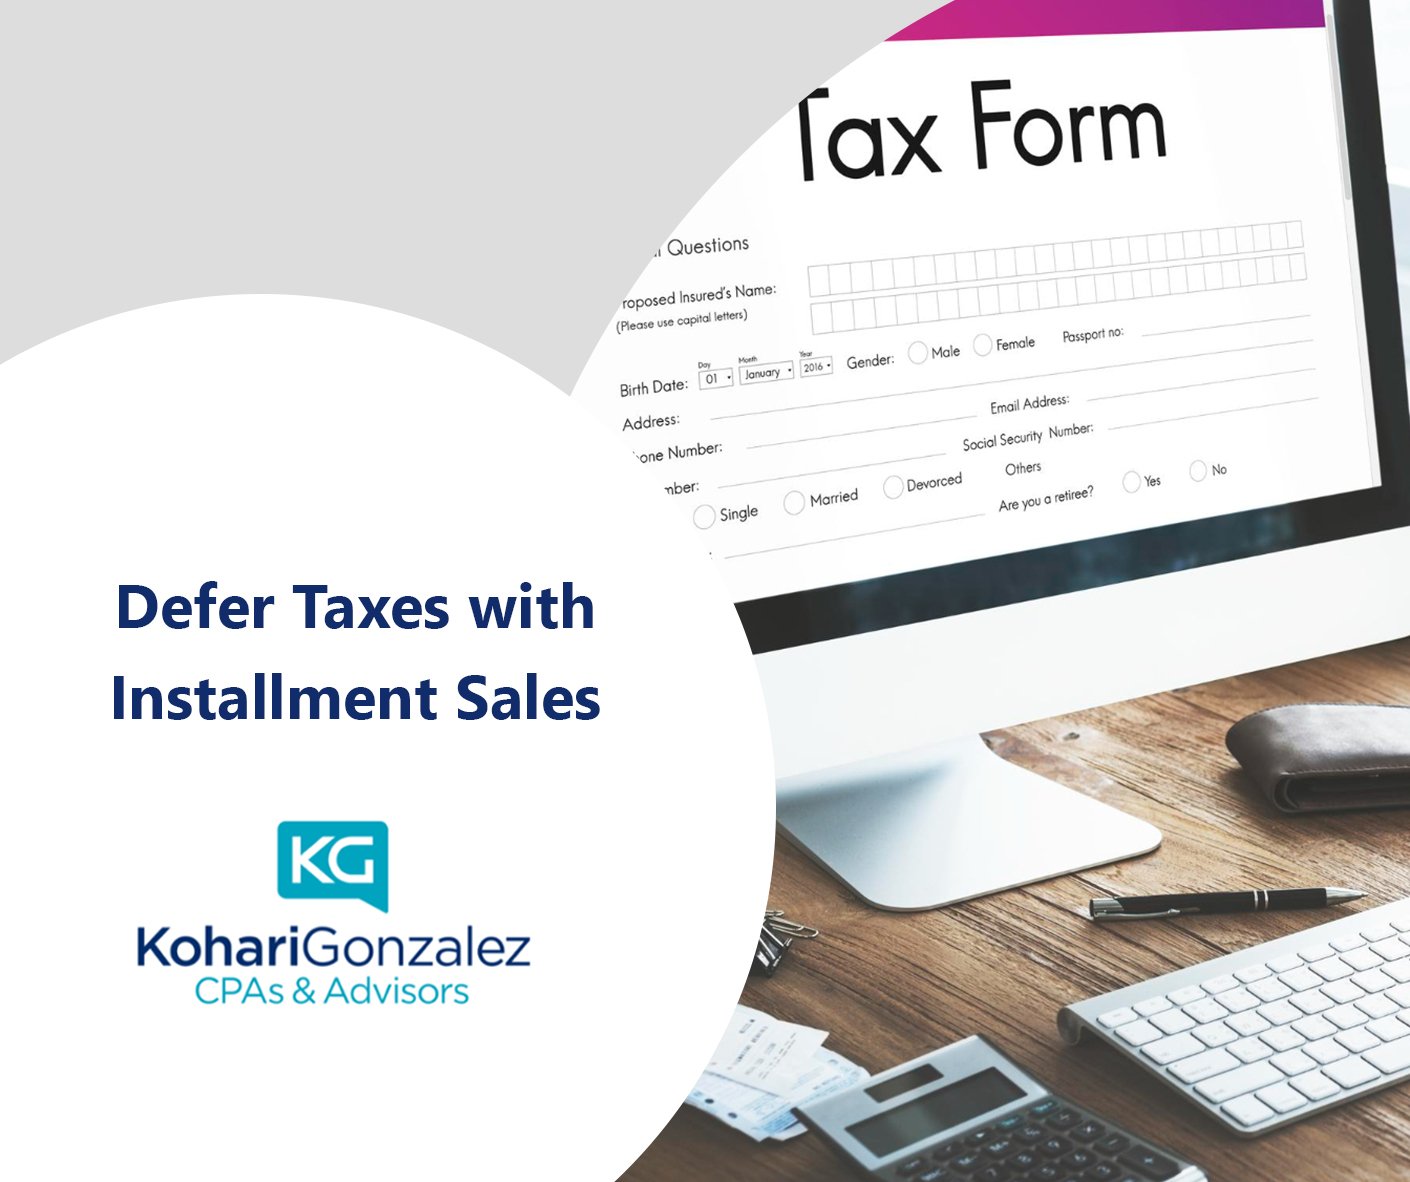 Defer Taxes with Installment Sales